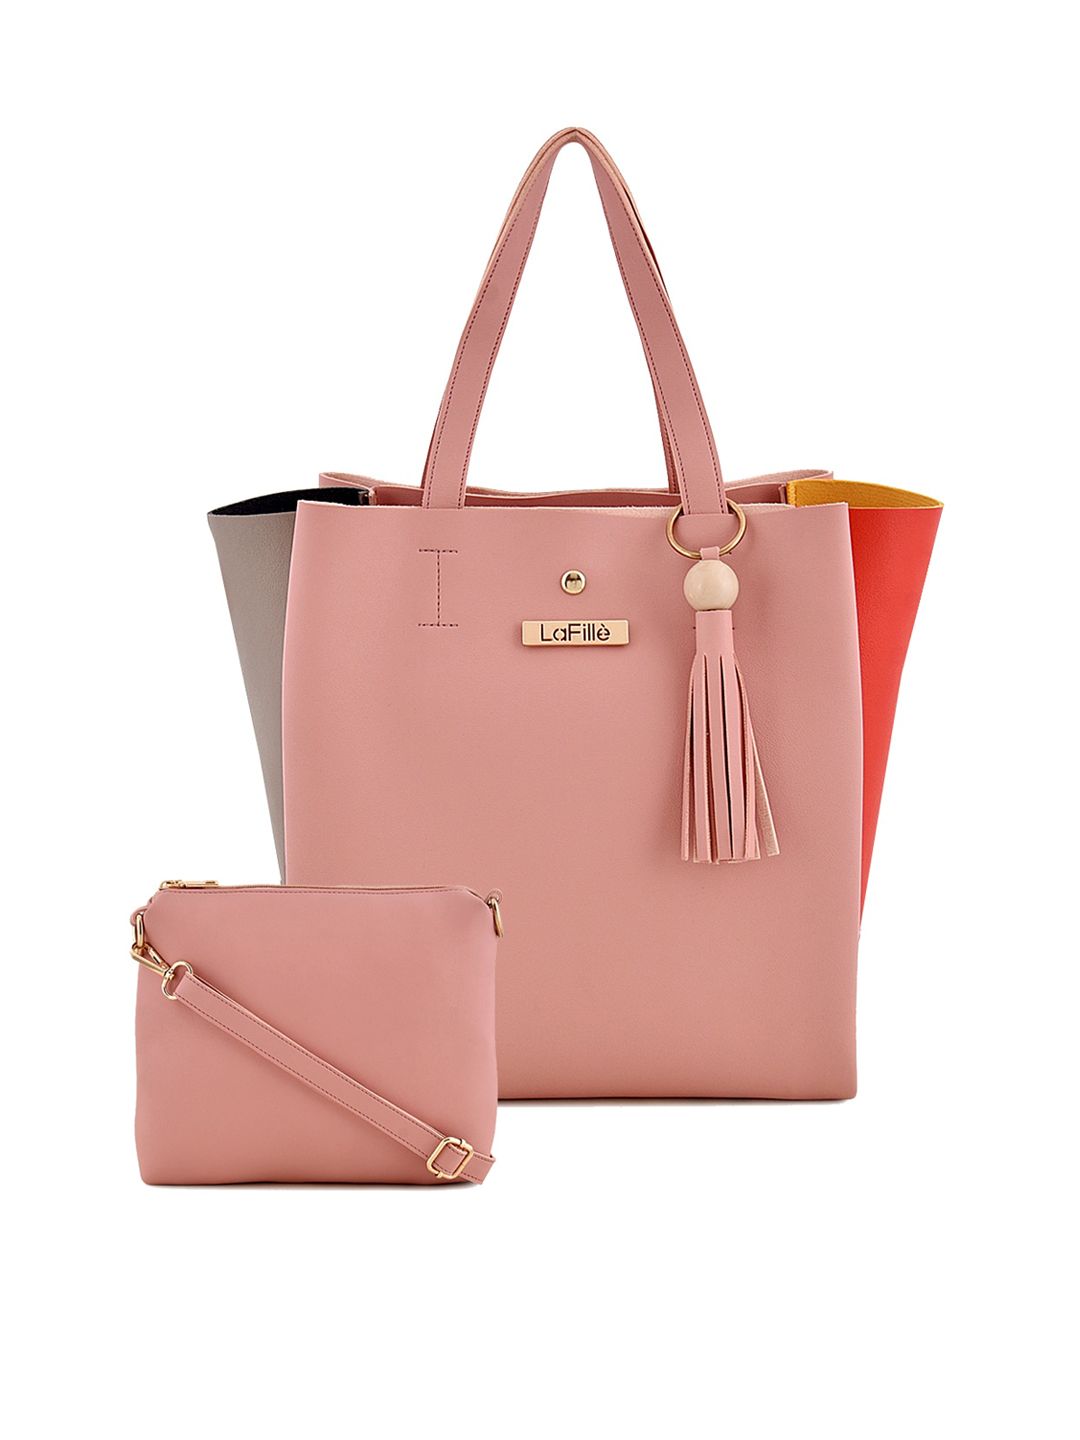 LaFille Pink PU Structured Tote Bag with Tasselled Price in India